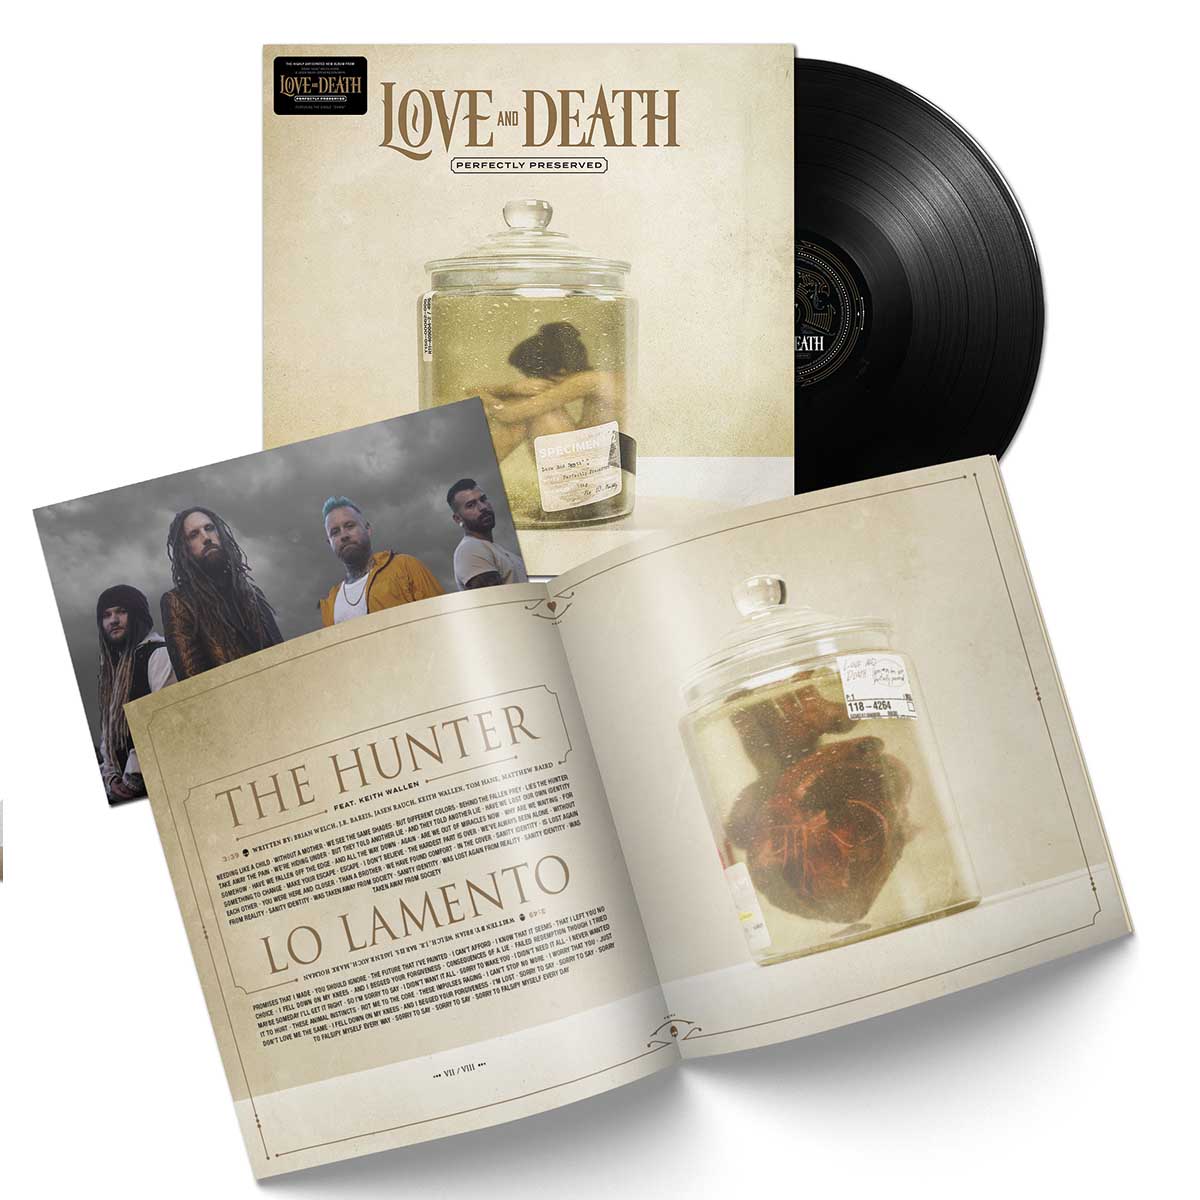 Love And Death "Perfectly Preserved" Black Vinyl w/ HAND-SIGNED Photo Card